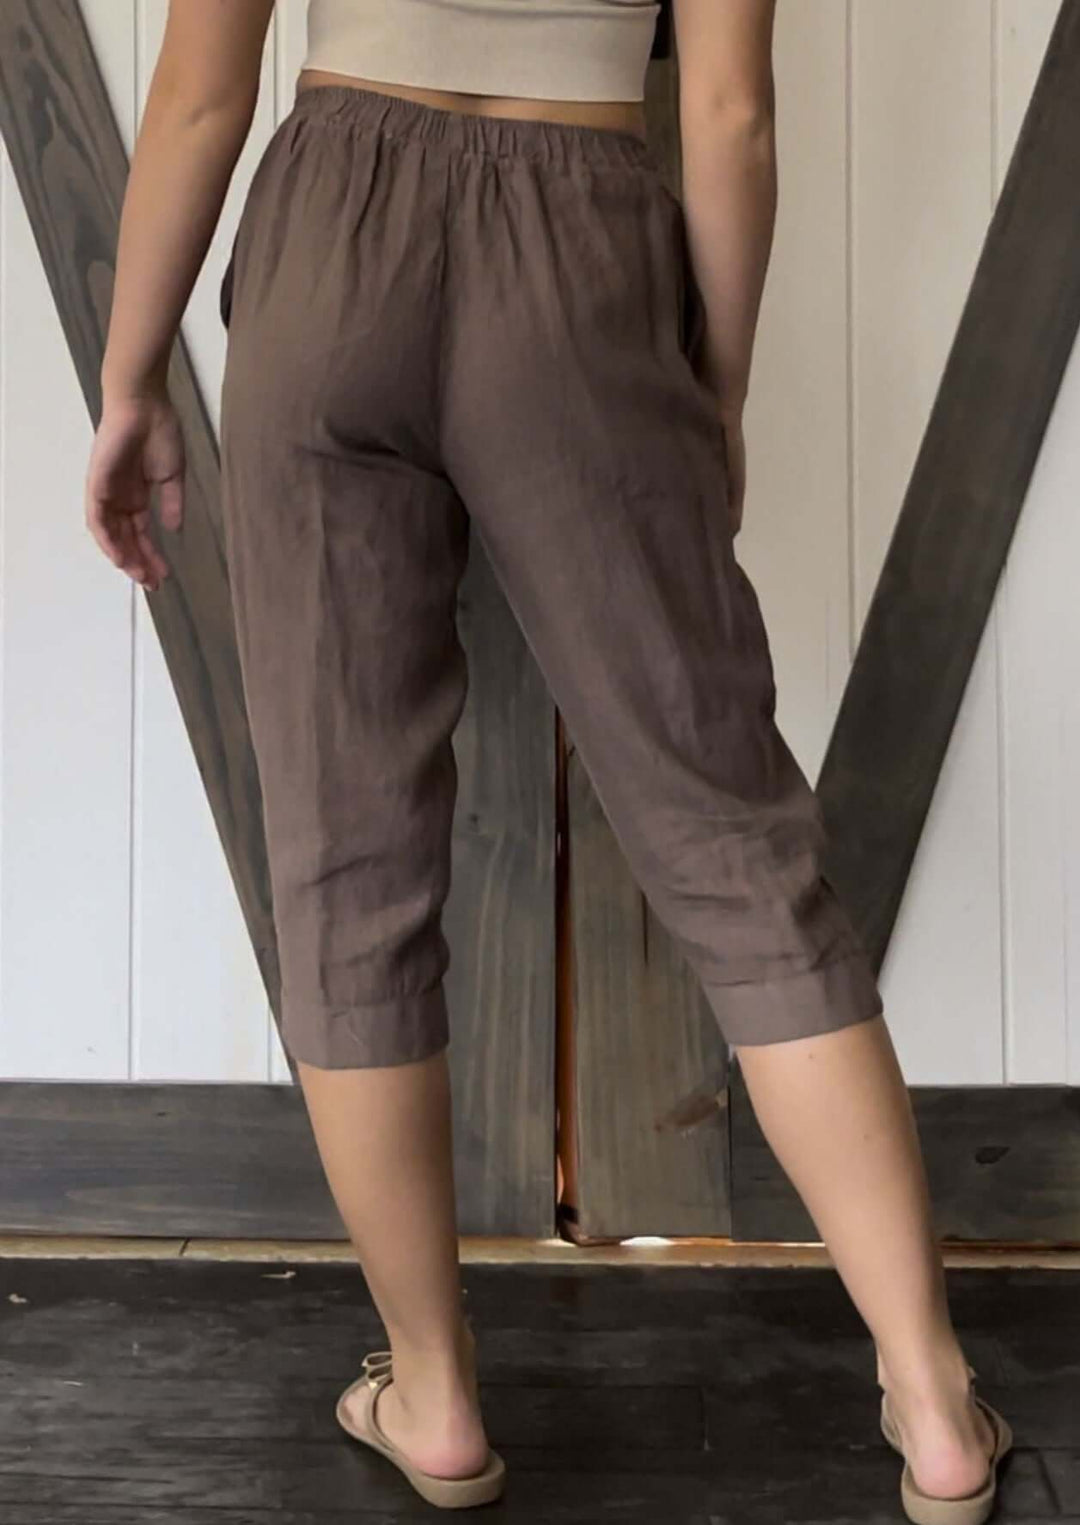 USA Made 100% Linen Ladies Mocha Capri Pants with Pockets | Match Point Style PLP2148 | Classy Cozy Cool Women's Made in America Boutique